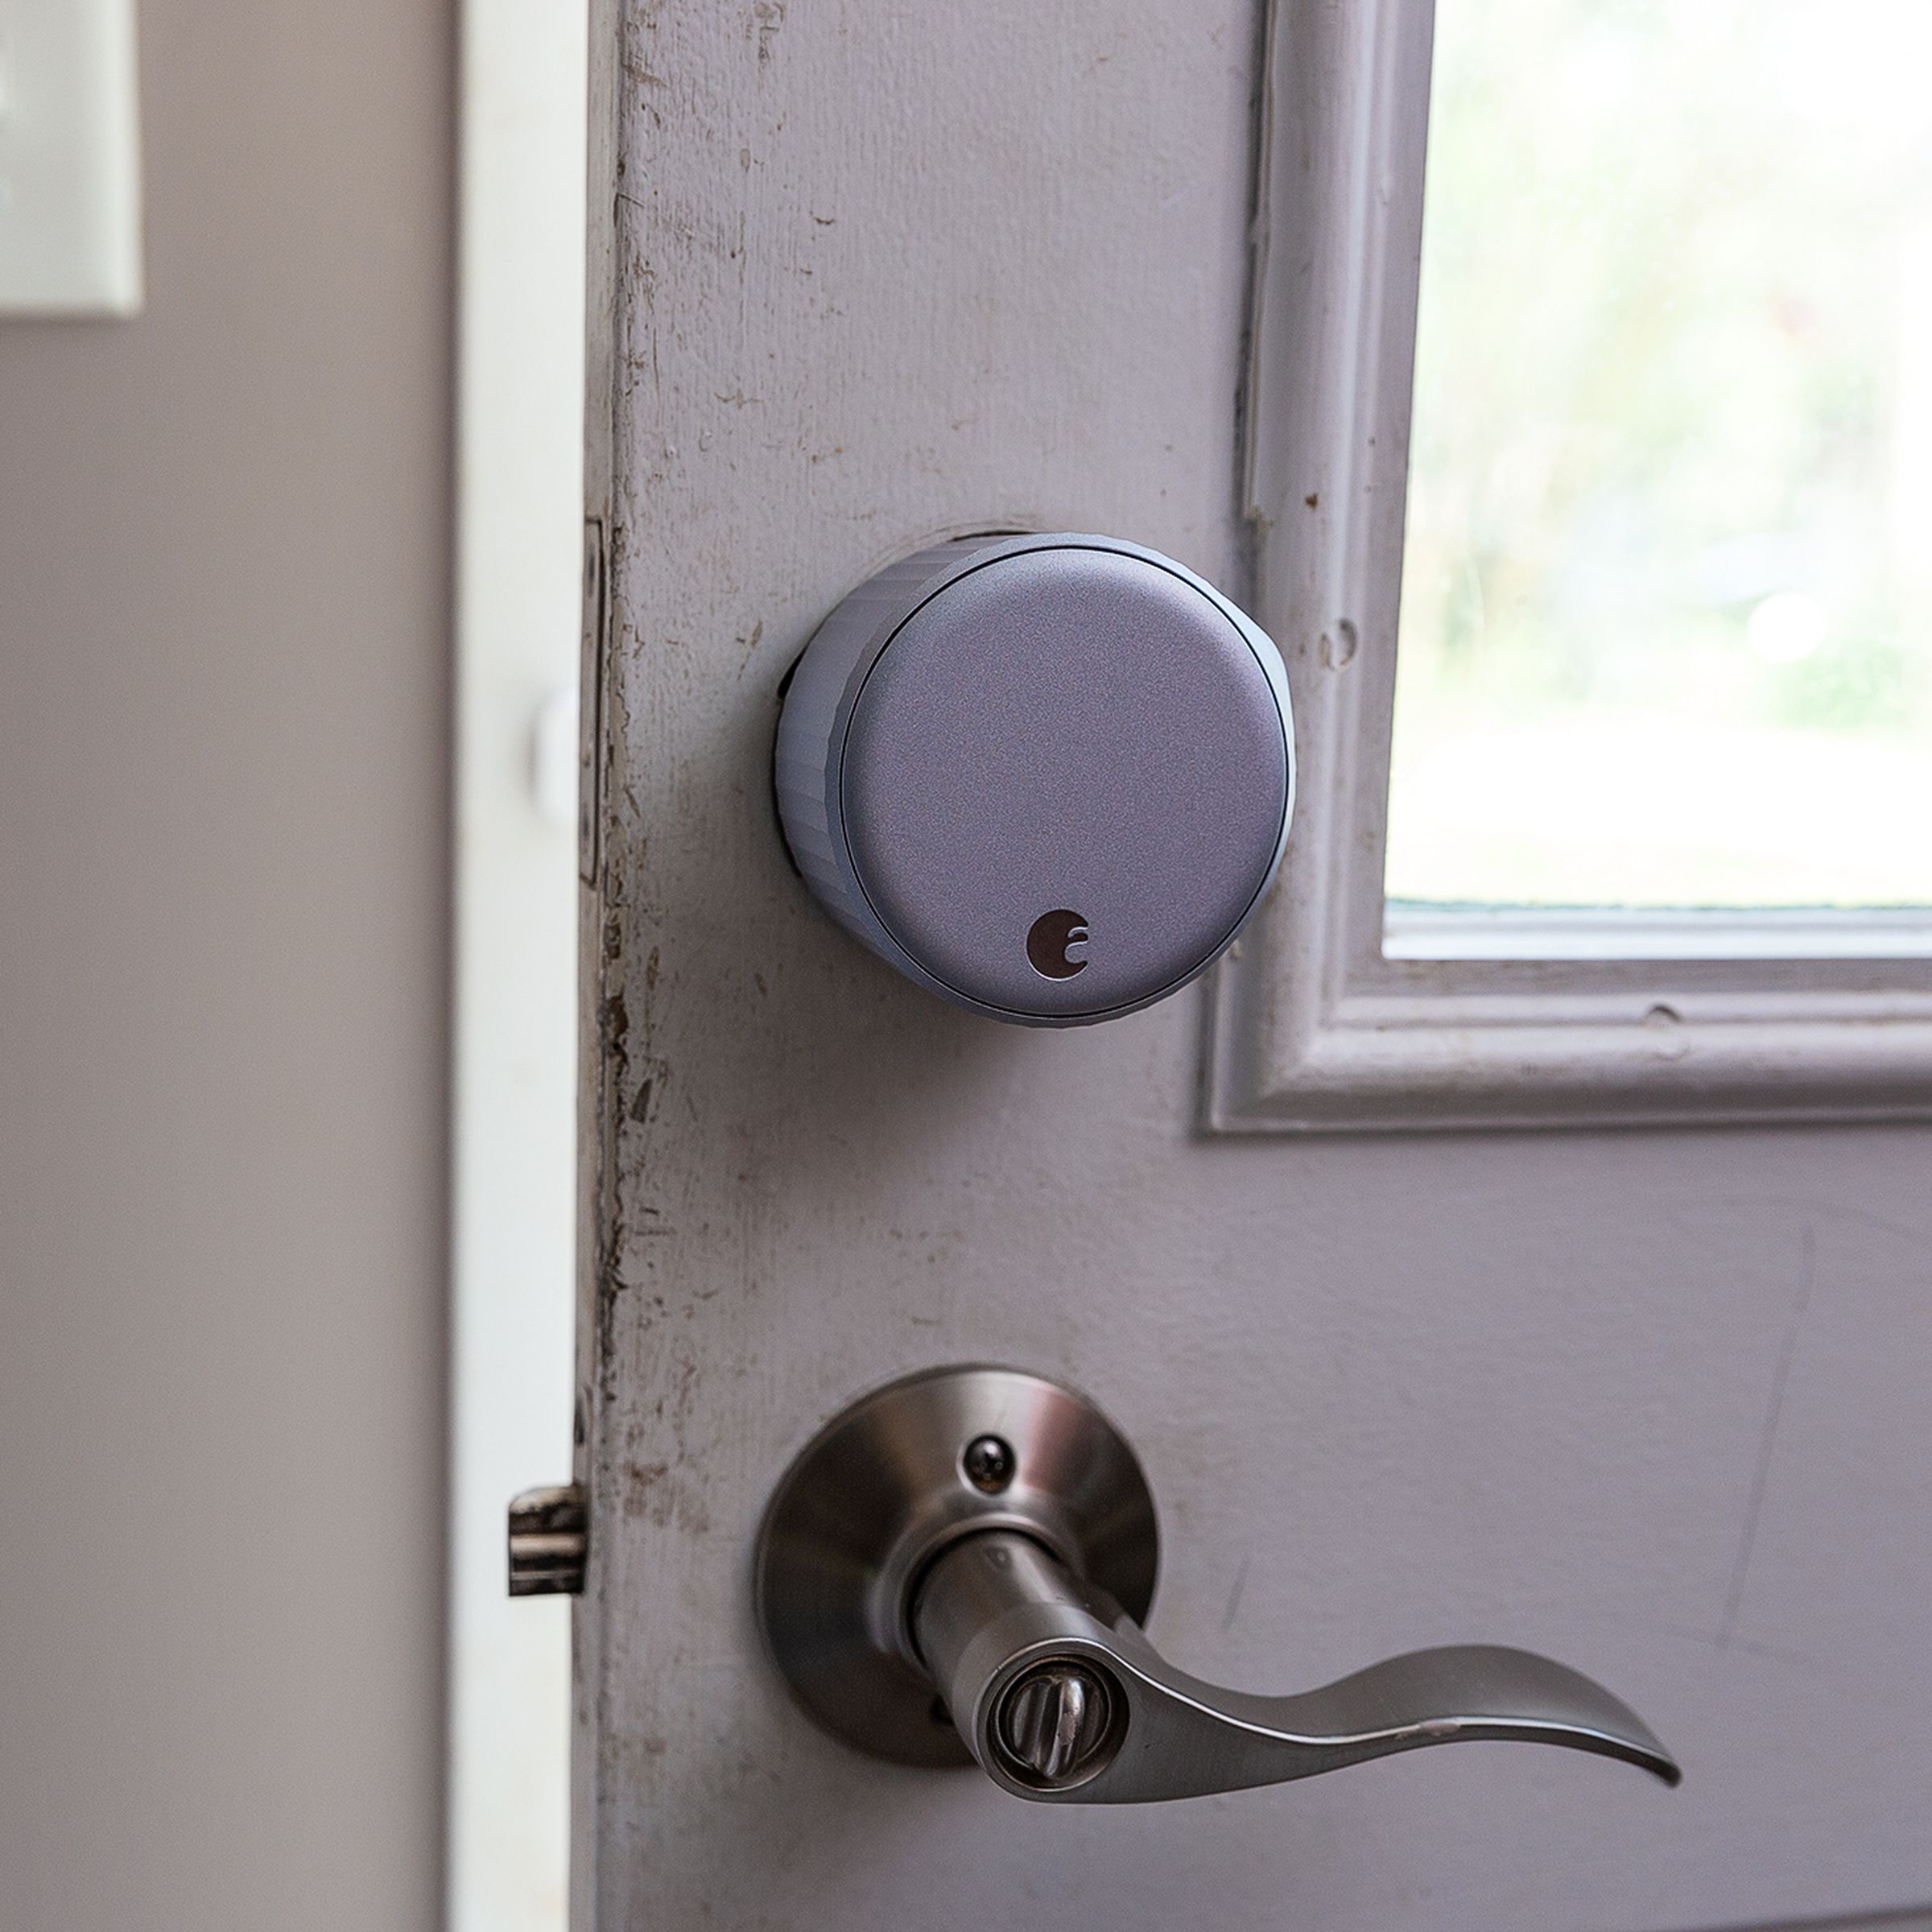 A large silver door lock on a door above a lever handle